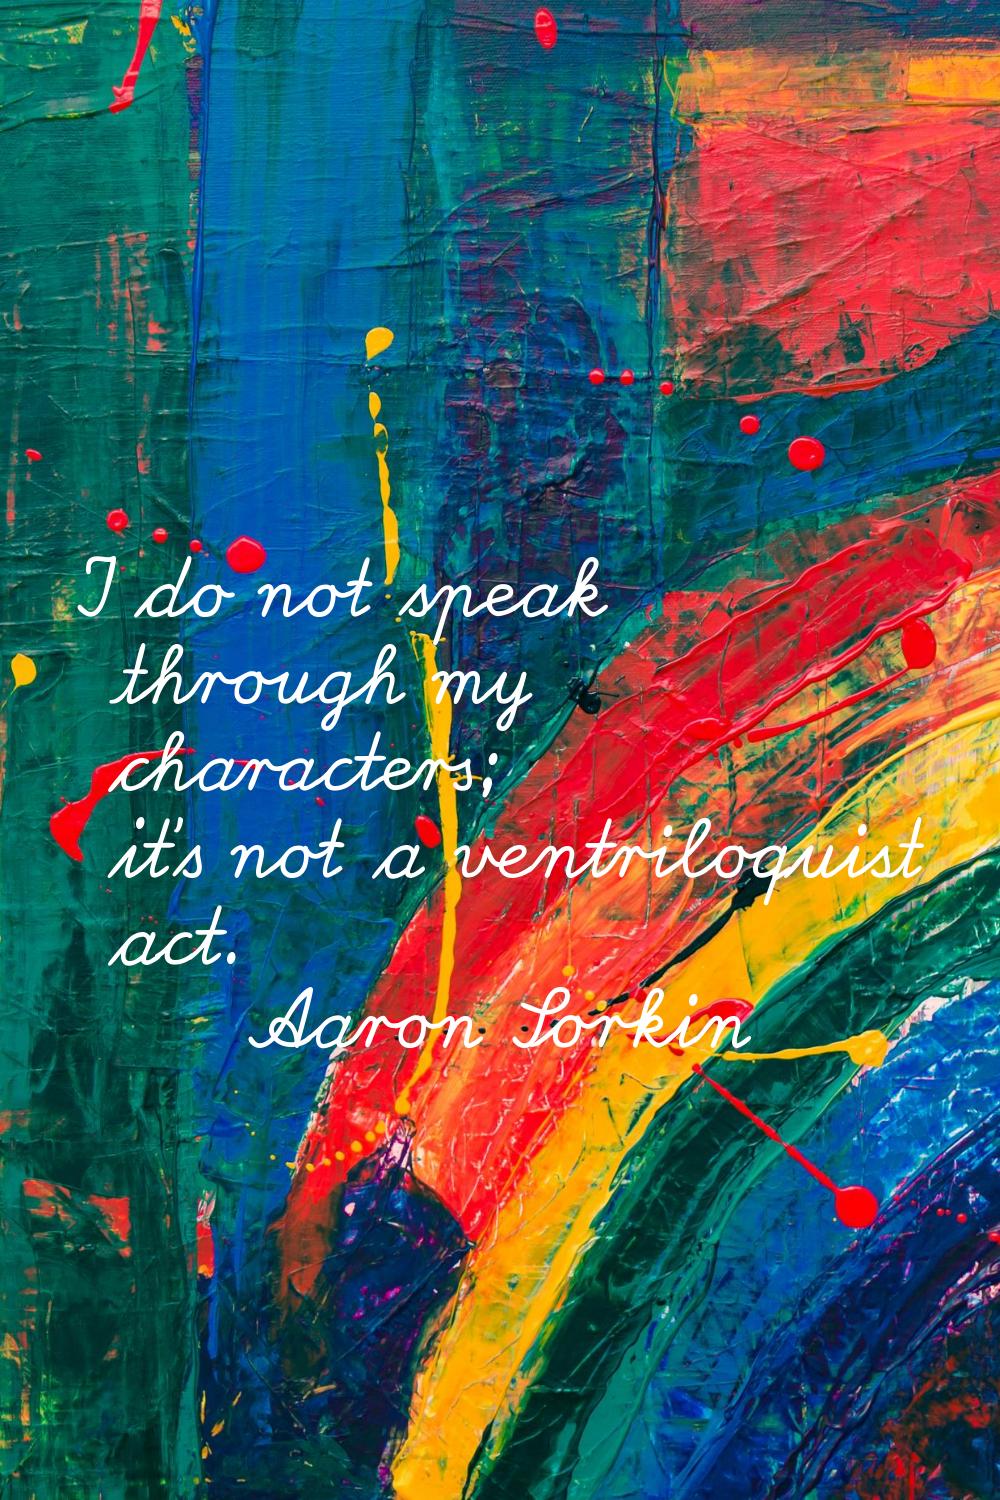 I do not speak through my characters; it's not a ventriloquist act.